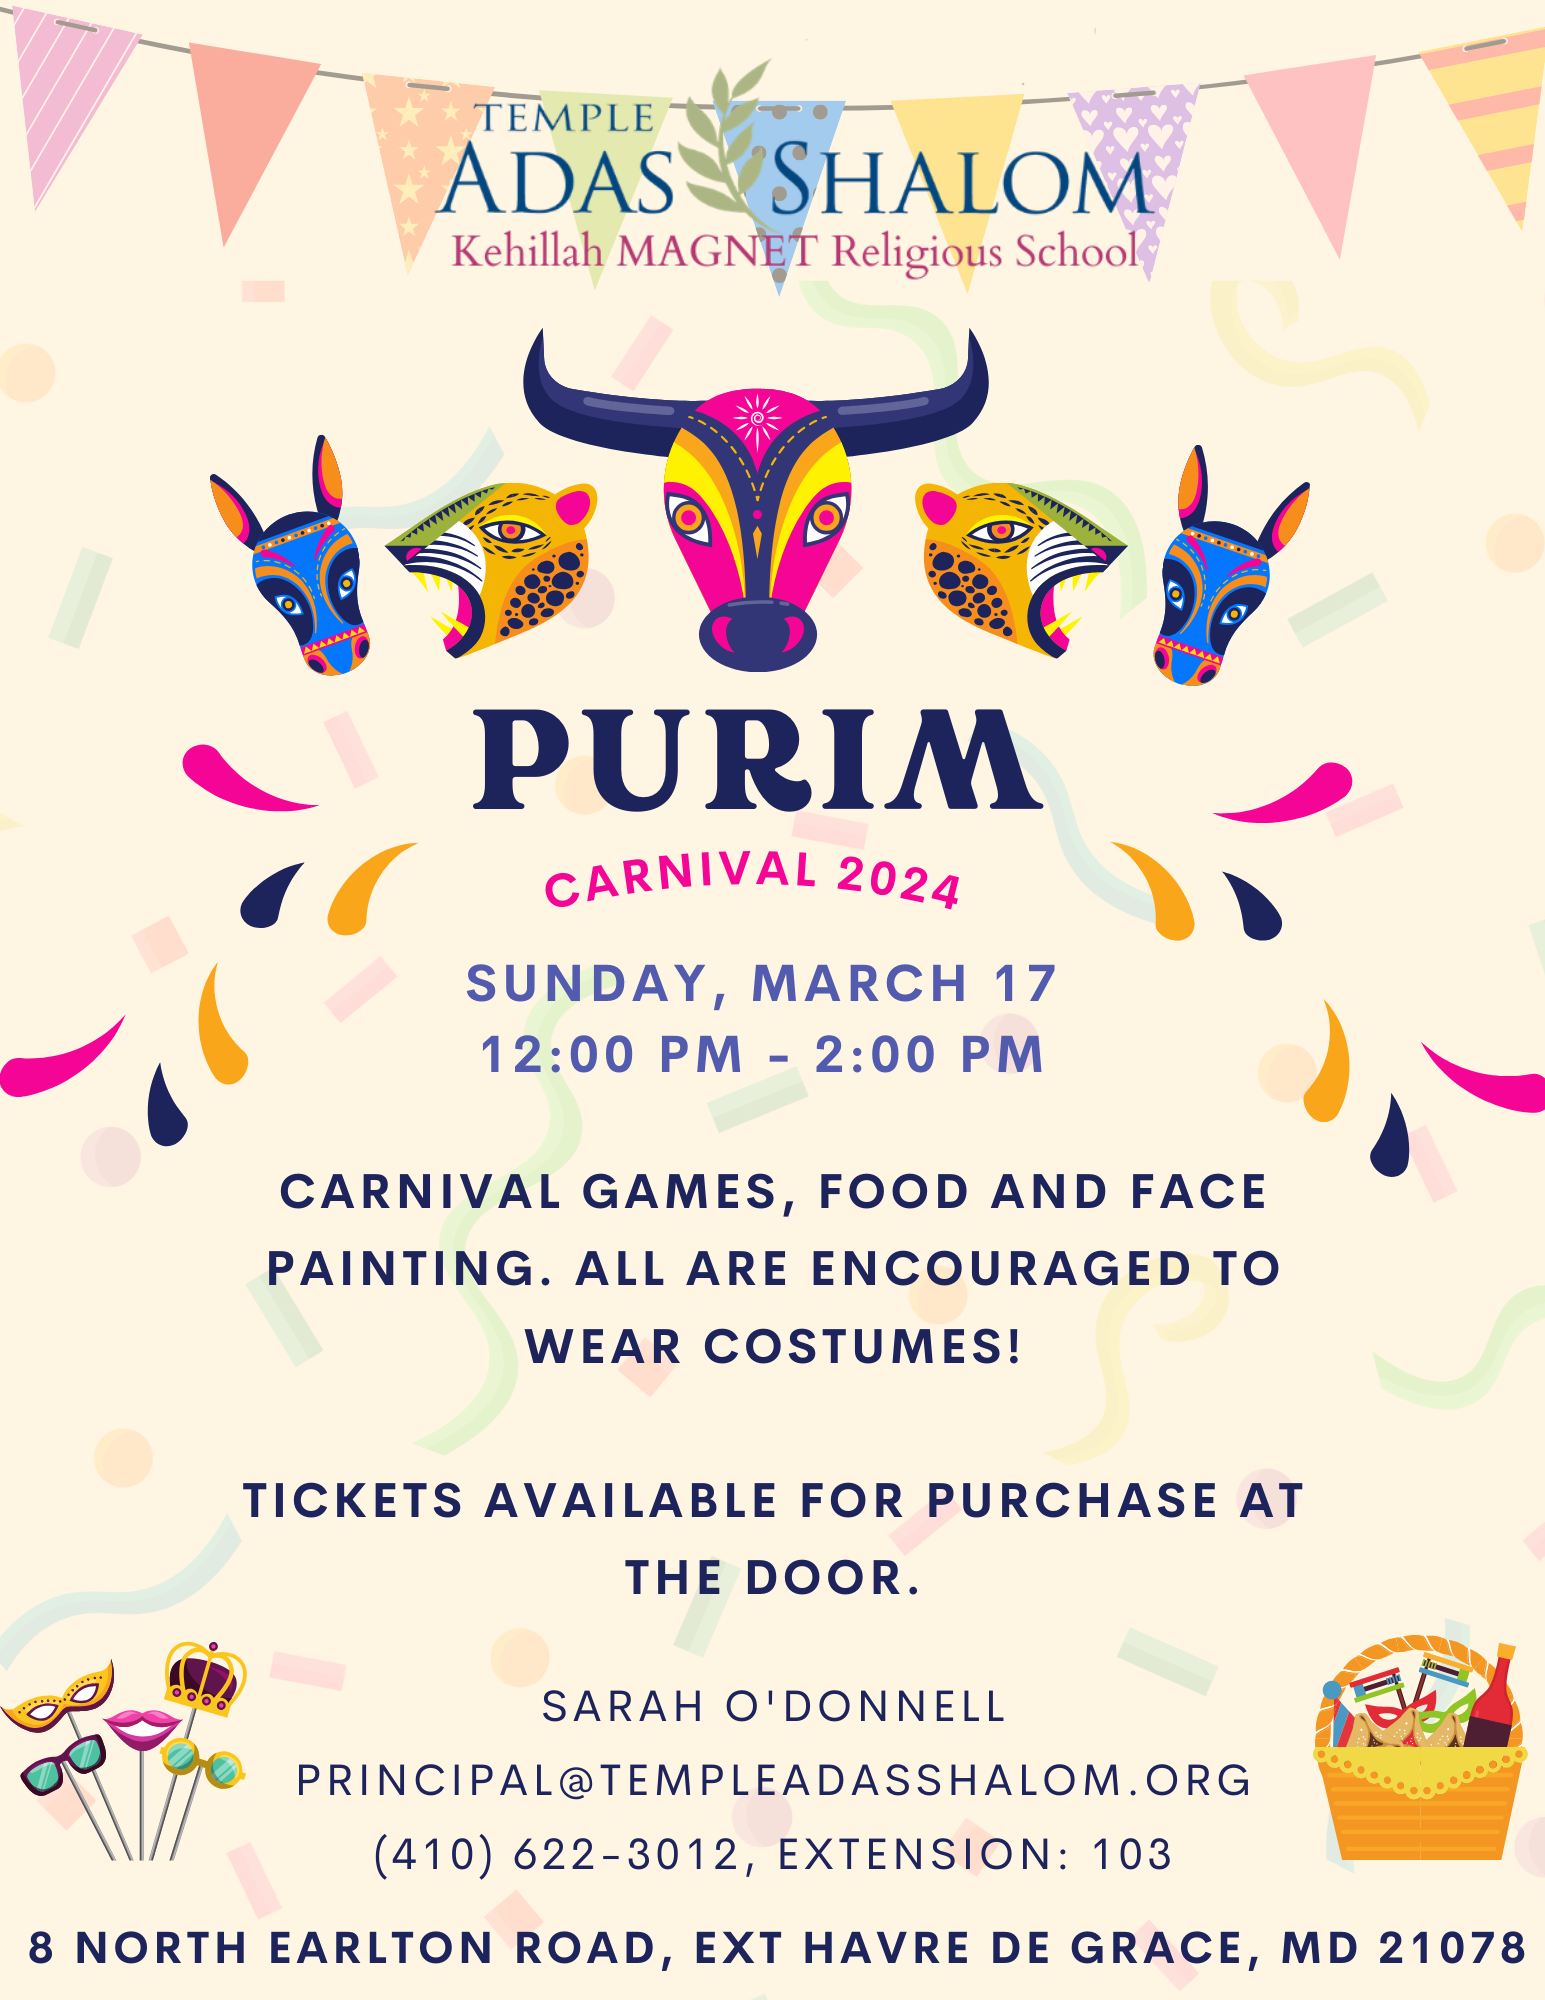 Carnival Games, Food and Face Painting. All are encouraged to wear costumes. Fun for the whole family! Tickets available for purchase at the door. (1)